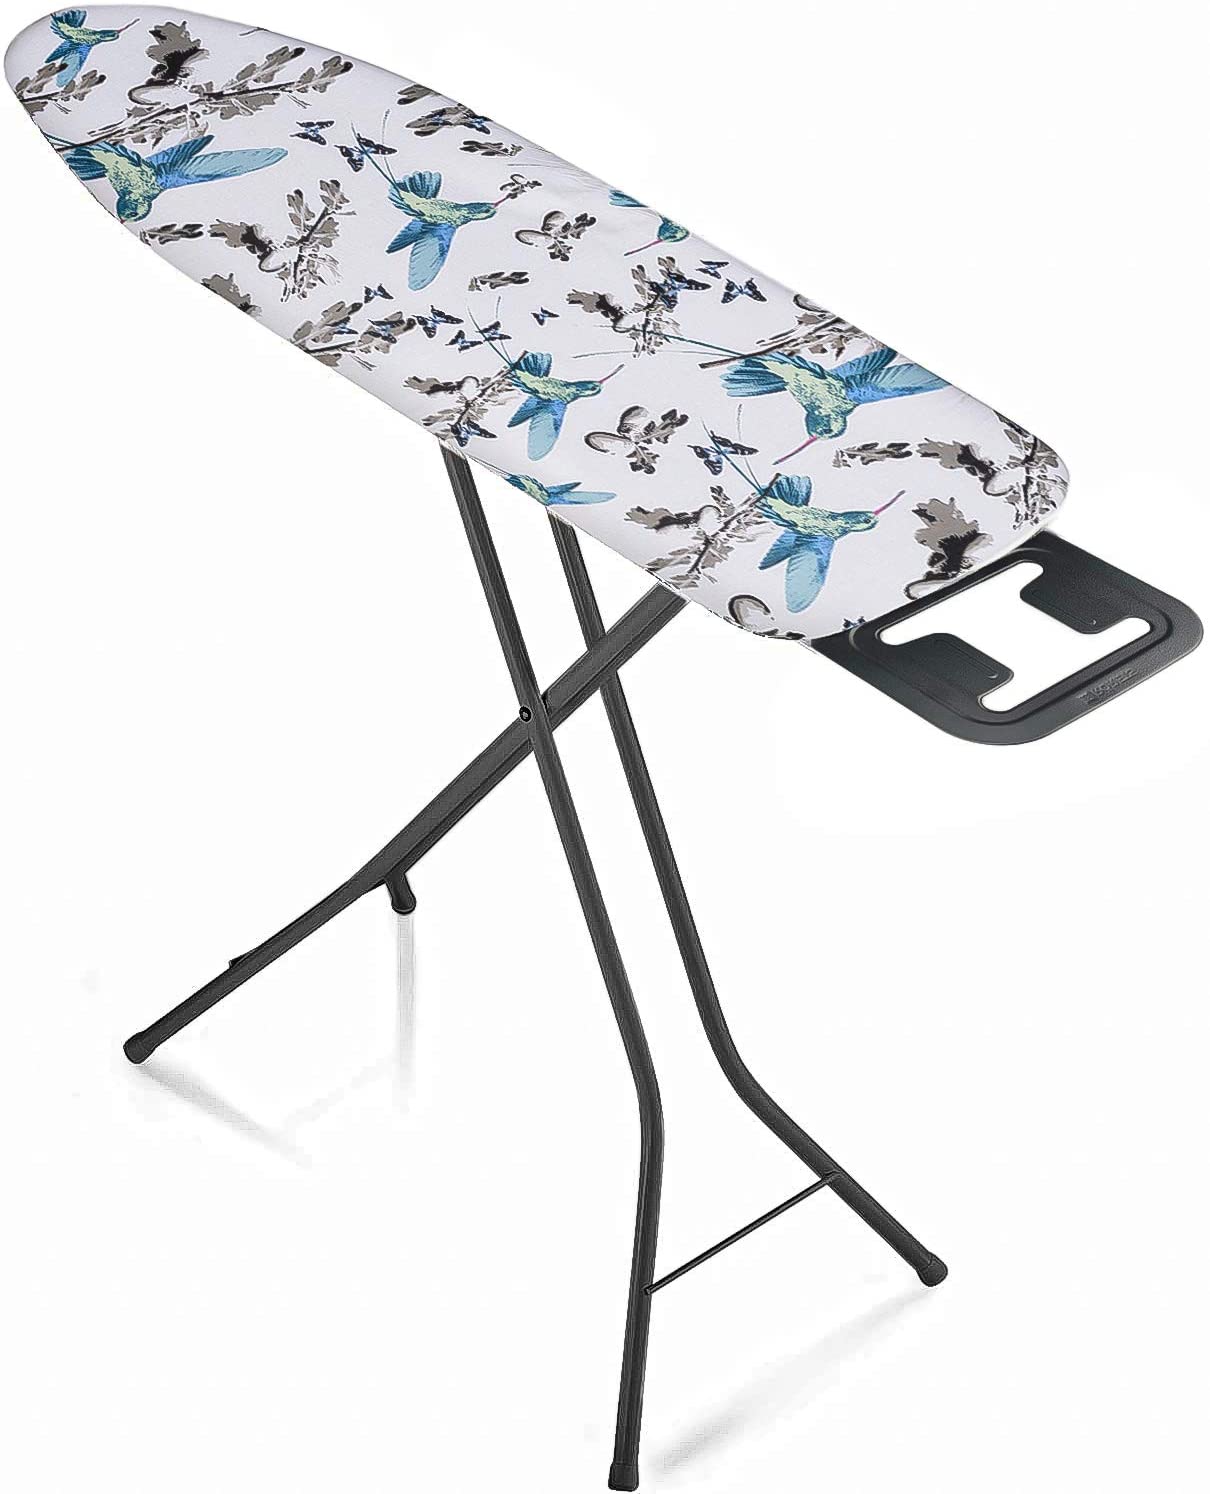 Bartnelli Ironing Board Made in Europe | Iron Board with 4 Layered Cover & Pad, Height Adjustable up to 36" Features A Safety Iron Rest, 4 Steel Legs, for Home Laundry Room or Dorm Use (43x14) (BLUE BIRDS)